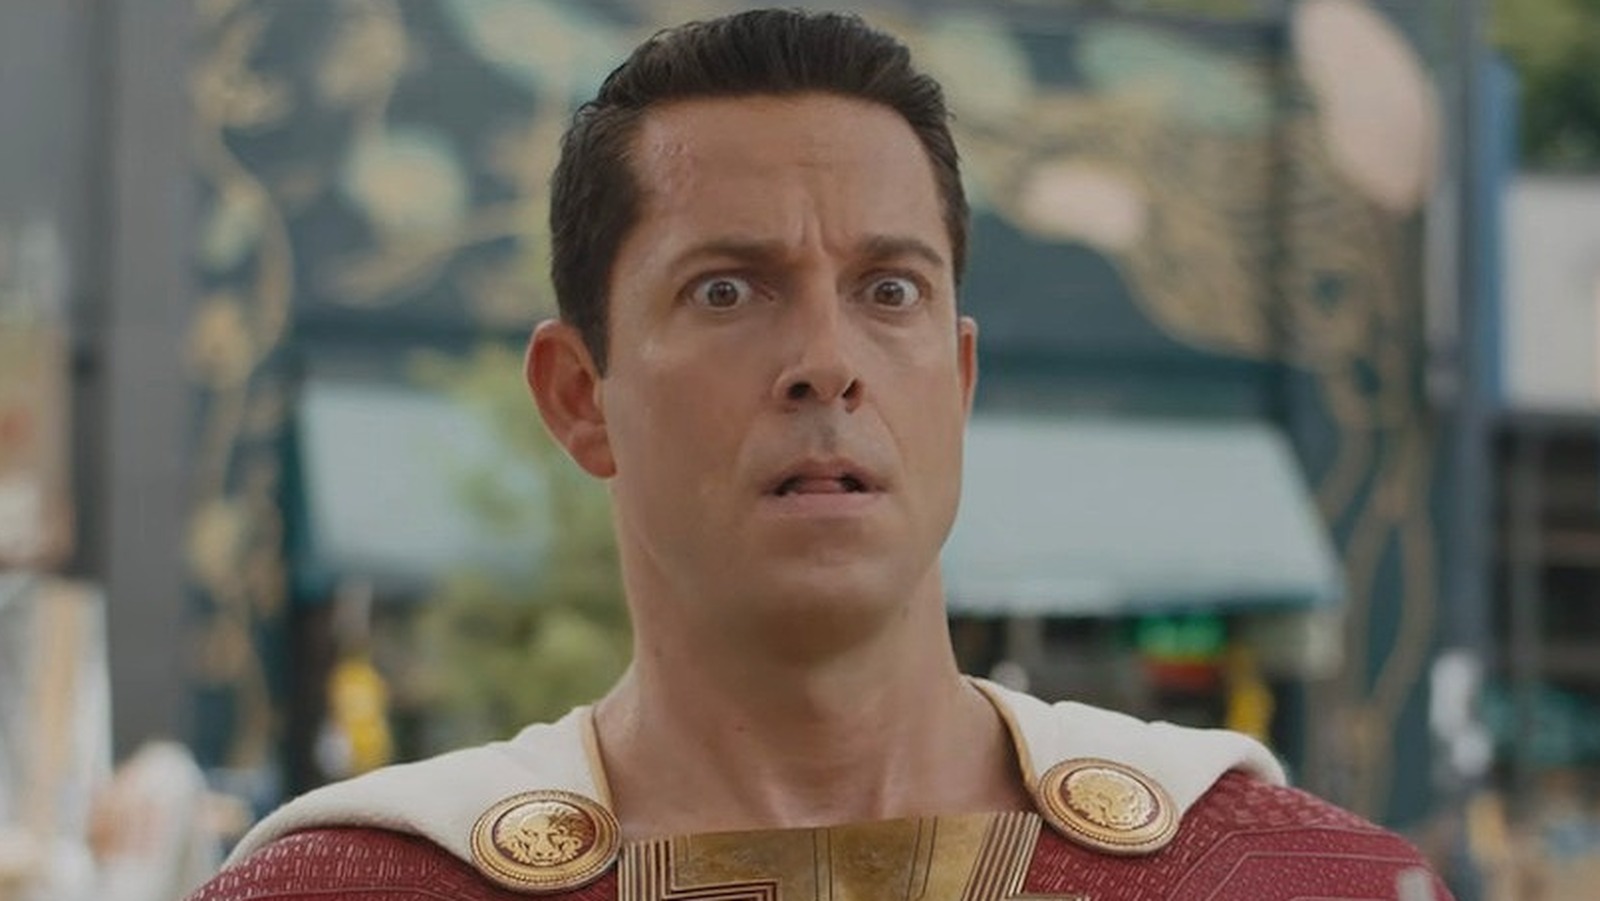 Weekend Box Office Numbers SUCK As Shazam! 2 BOMBS